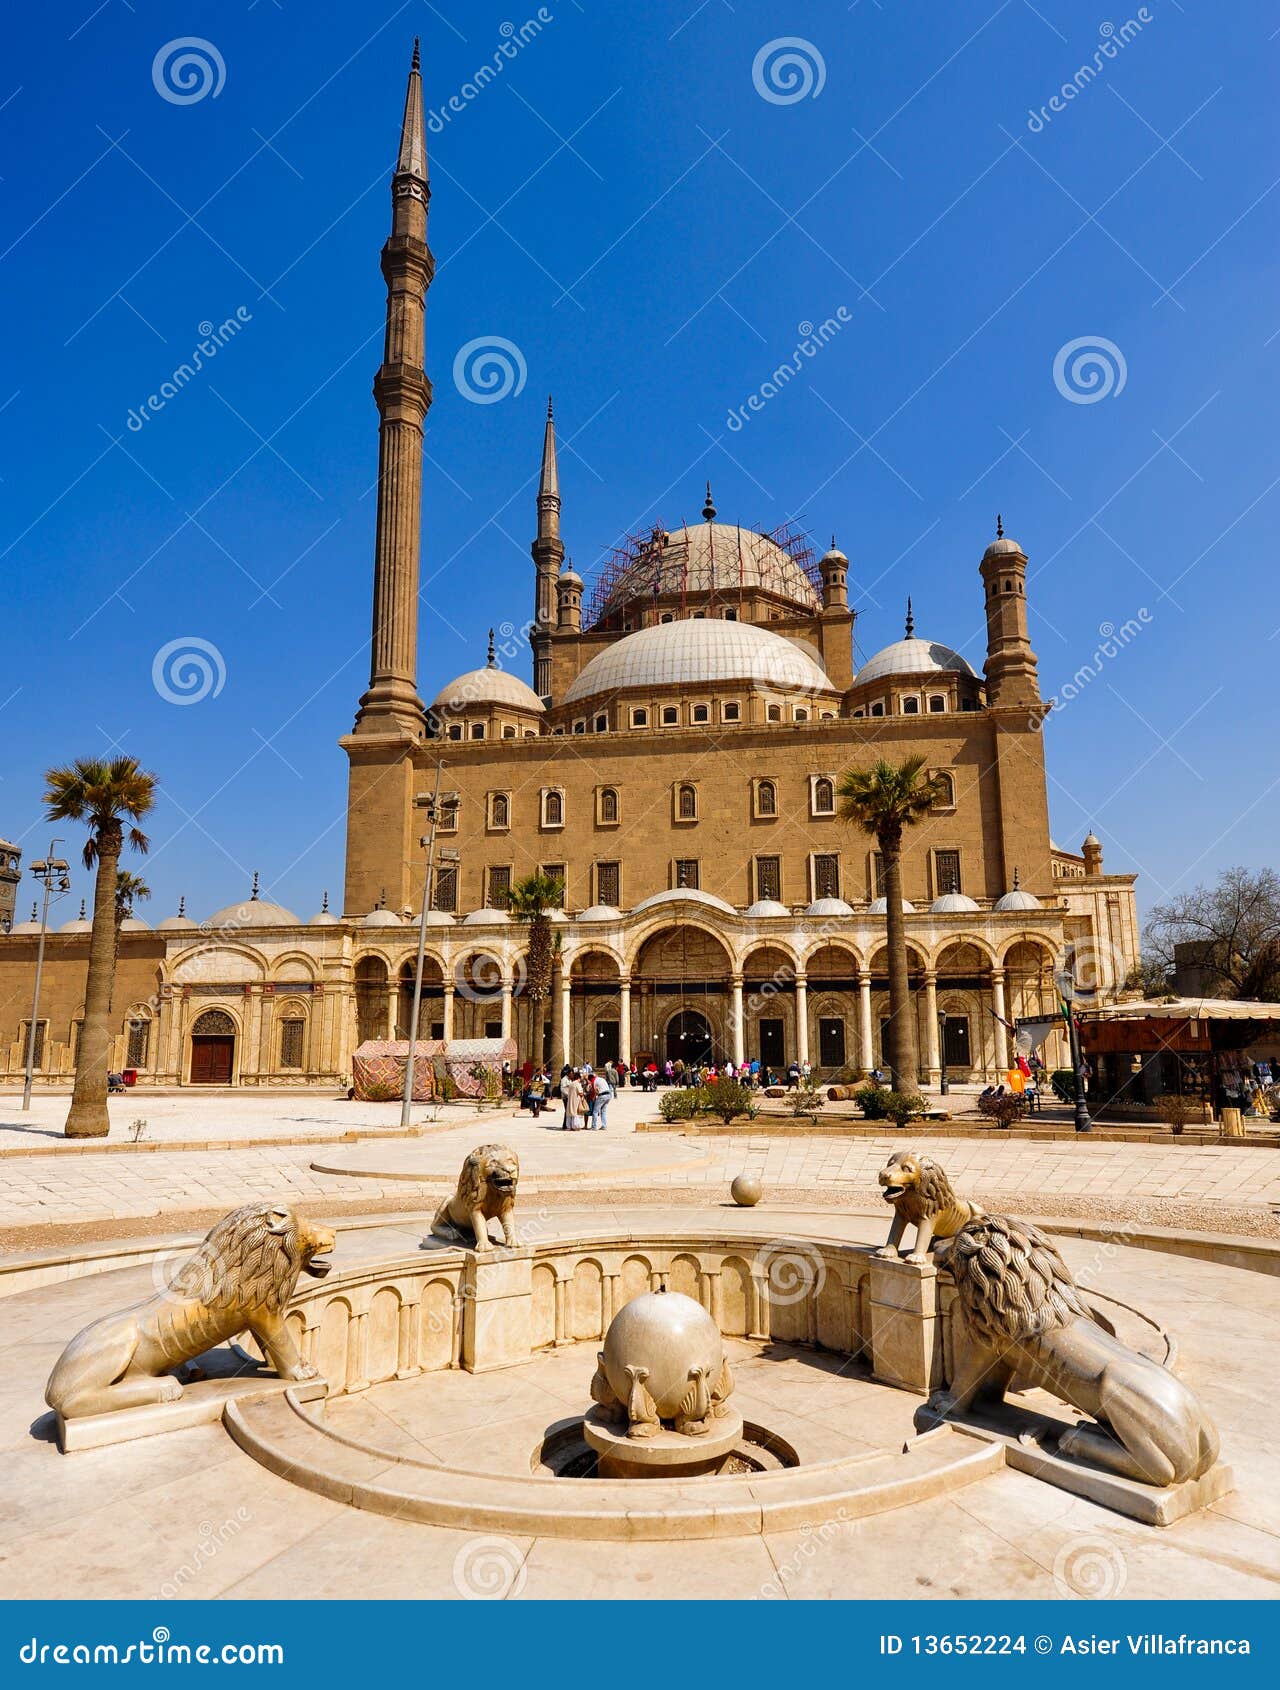 mosque of mohamed ali, cairo